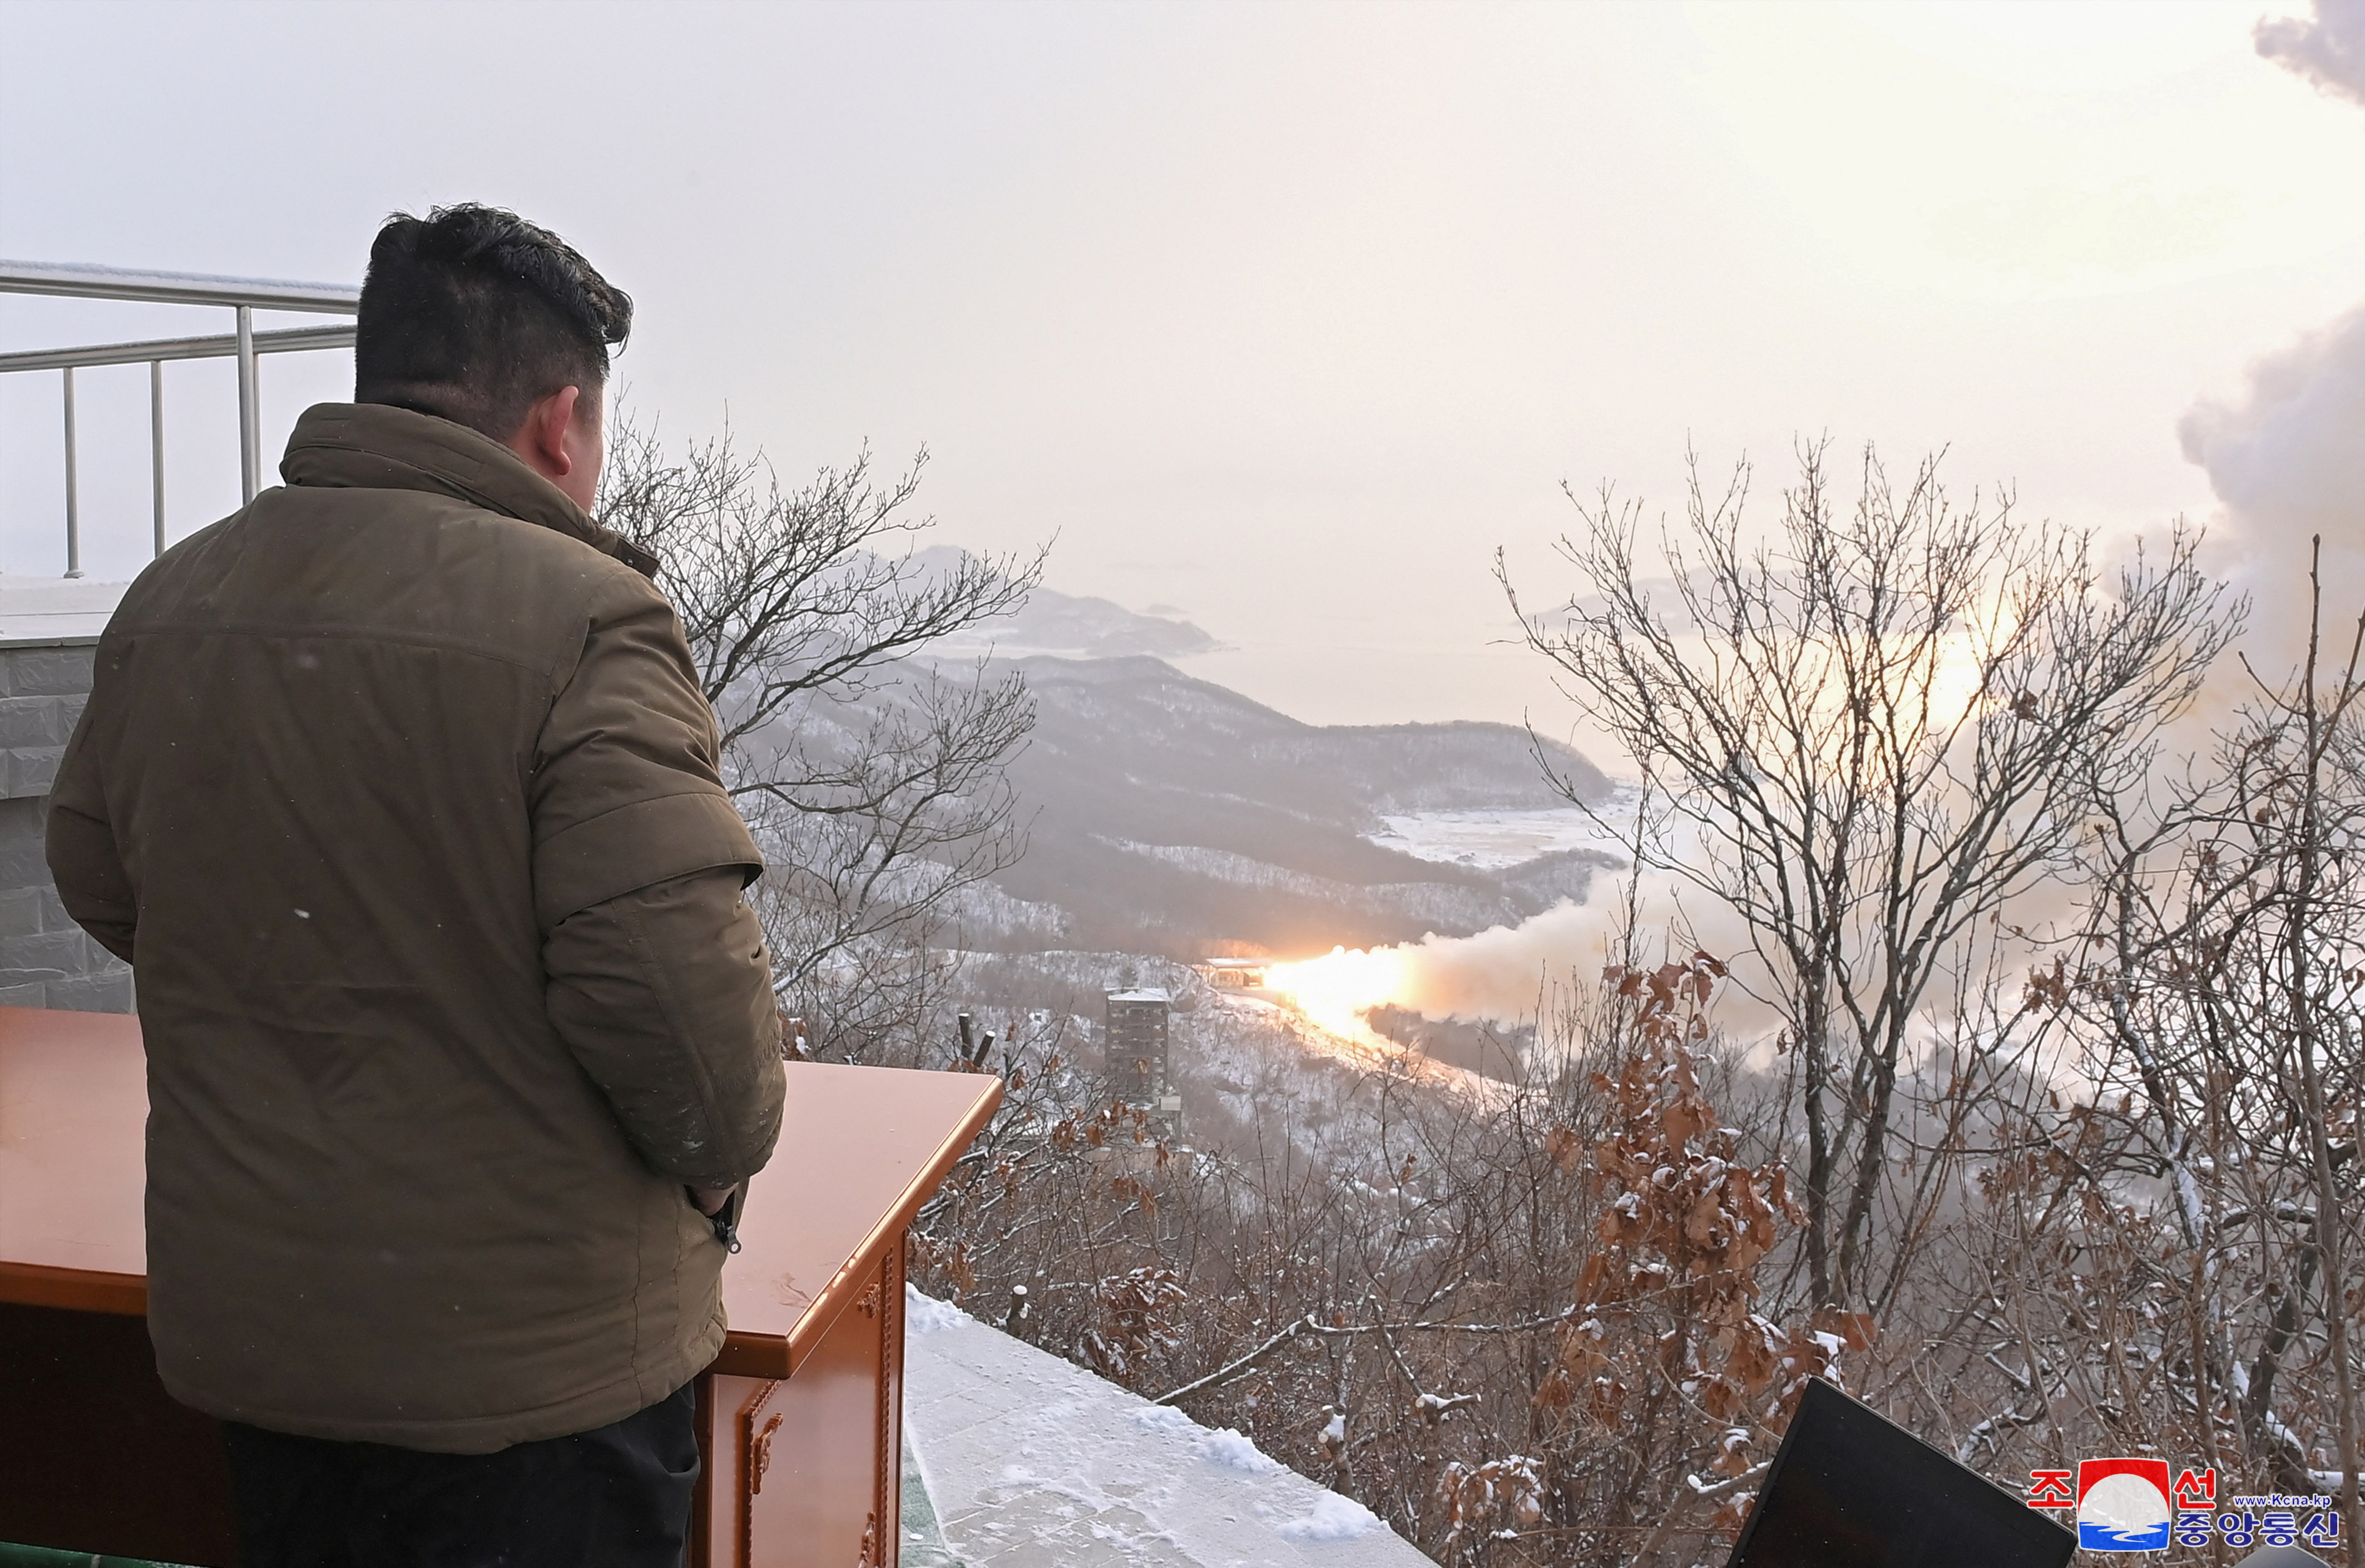 The raid was led by North Korean dictator Kim Jong Un "High thrust solid fuel engine" As part of the development of a new strategic weapon, the Sohae satellite launch site in Dongchang-ri, North Korea, in this Dec. 15, 2022, photo released by the North's Korean Central News Agency (KCNA).